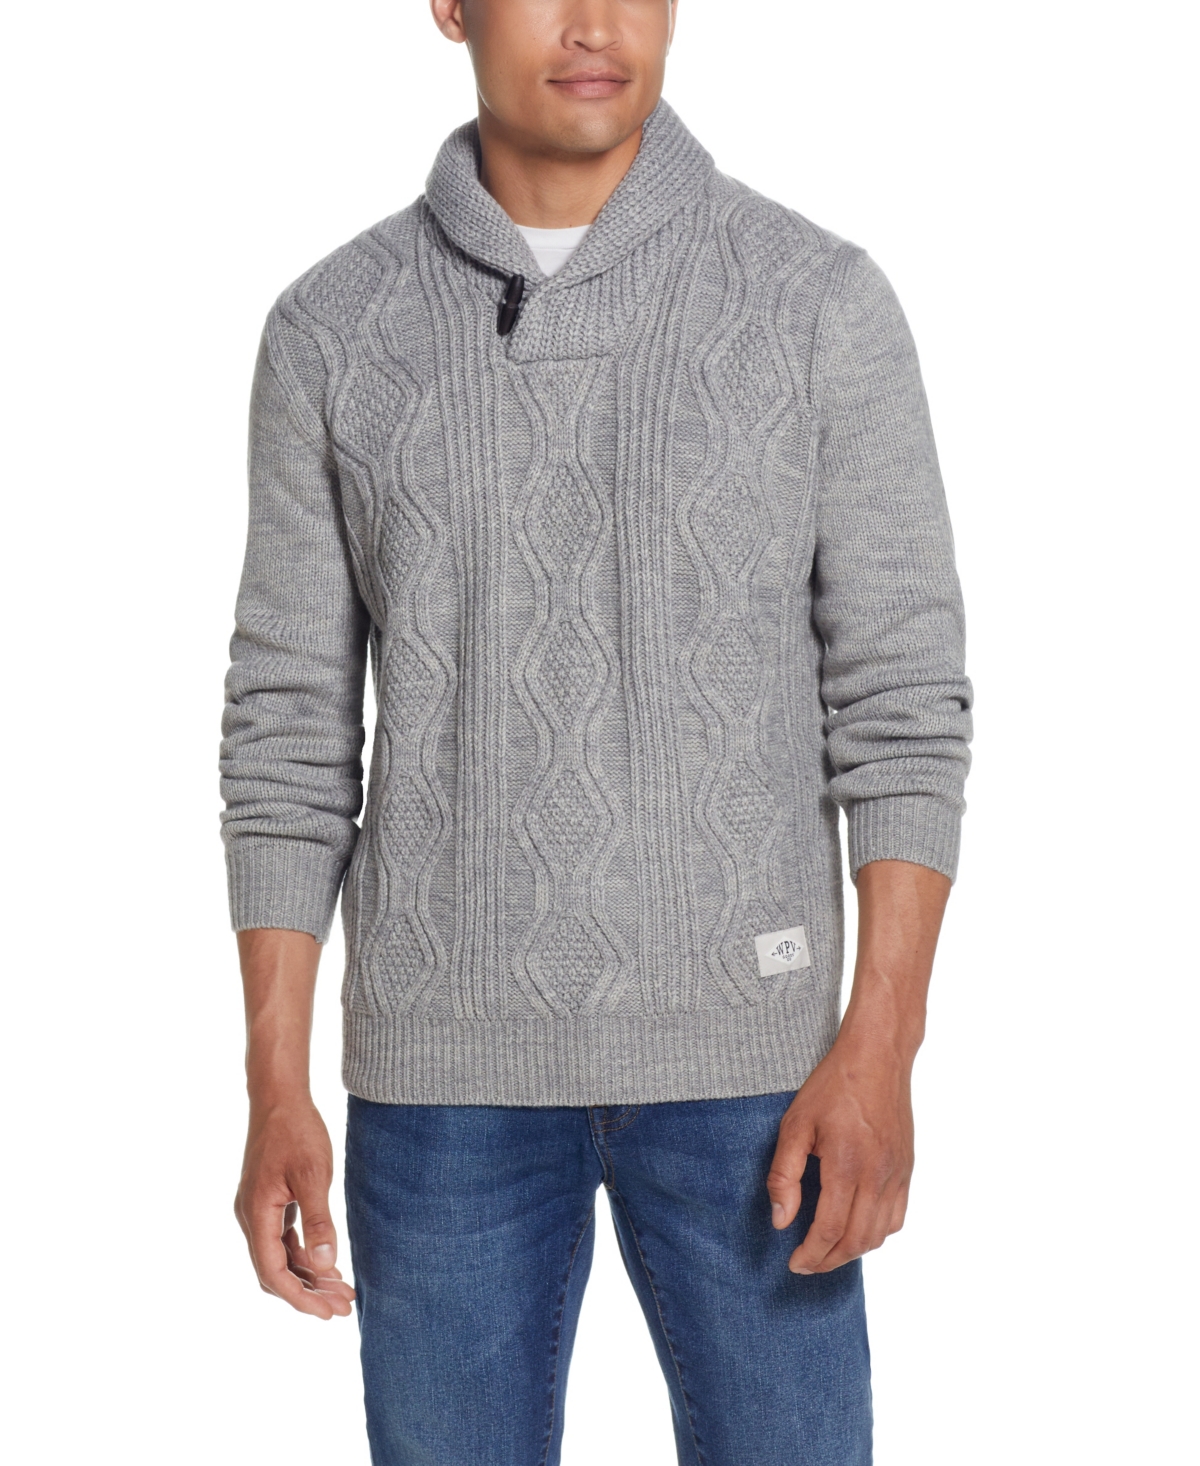 Weatherproof Vintage Men's Cable-knit Fisherman Shawl Collar Sweater In Pale Gray Heather